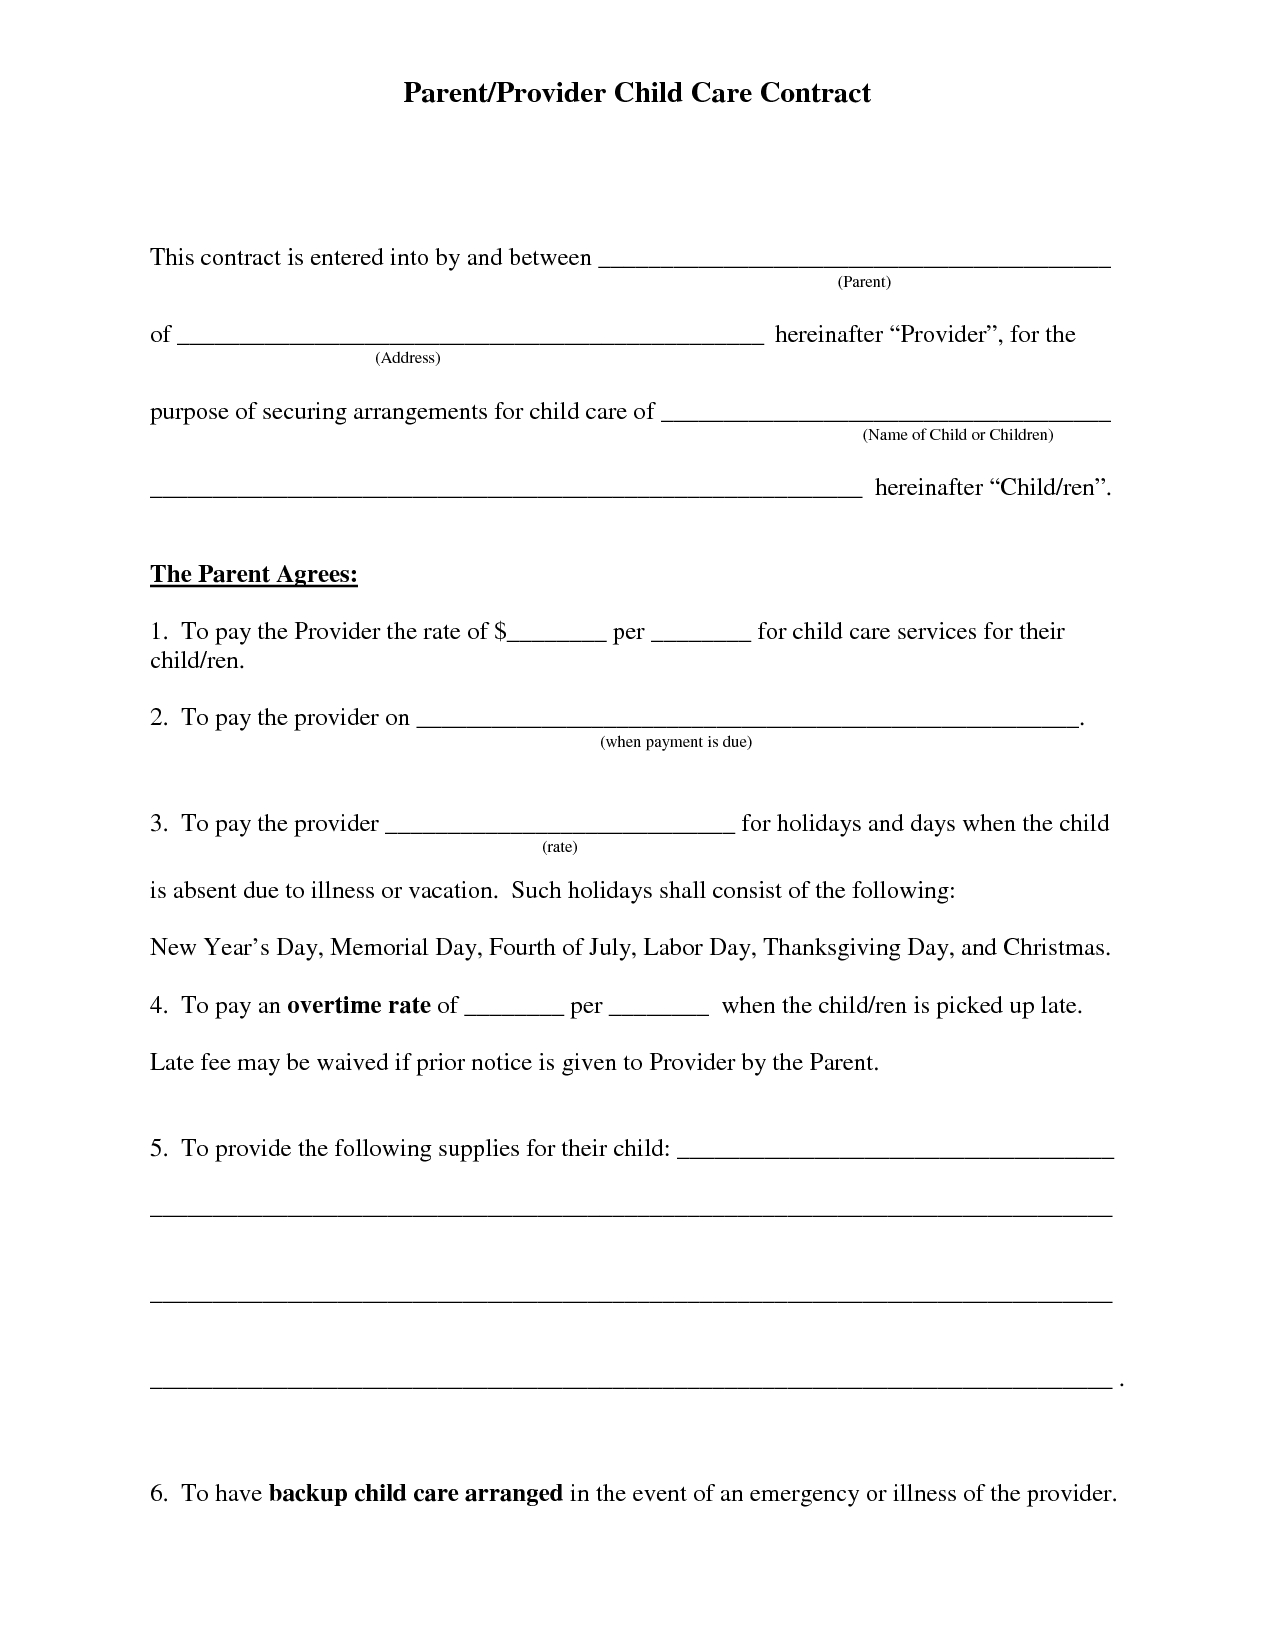 Free+Daycare+Contract+Forms | Printable Daycare Forms | Pinterest - Free Printable Daycare Forms